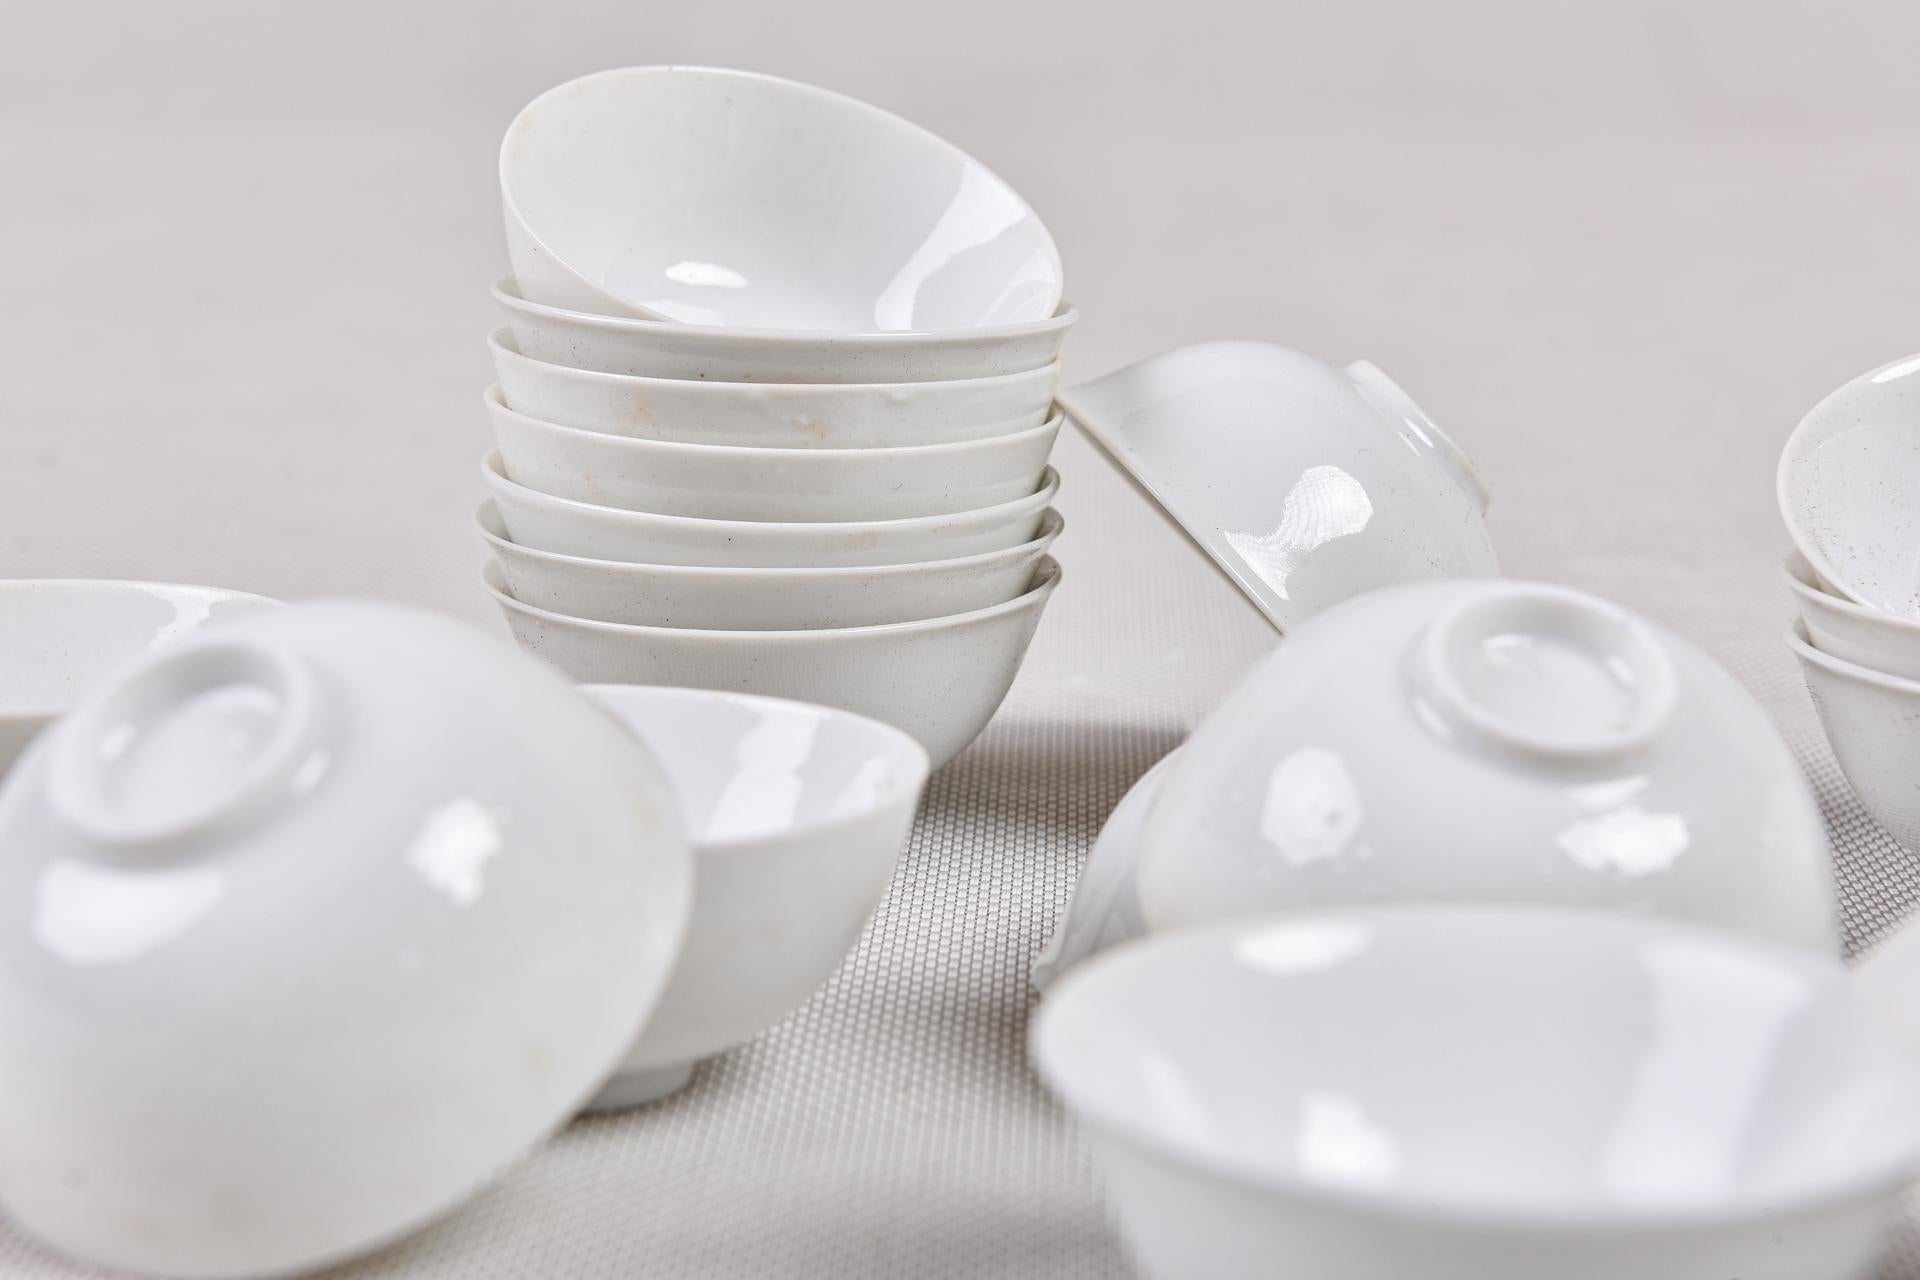 Other 180 Small Bowls in Very Fine White Porcelain For Sale